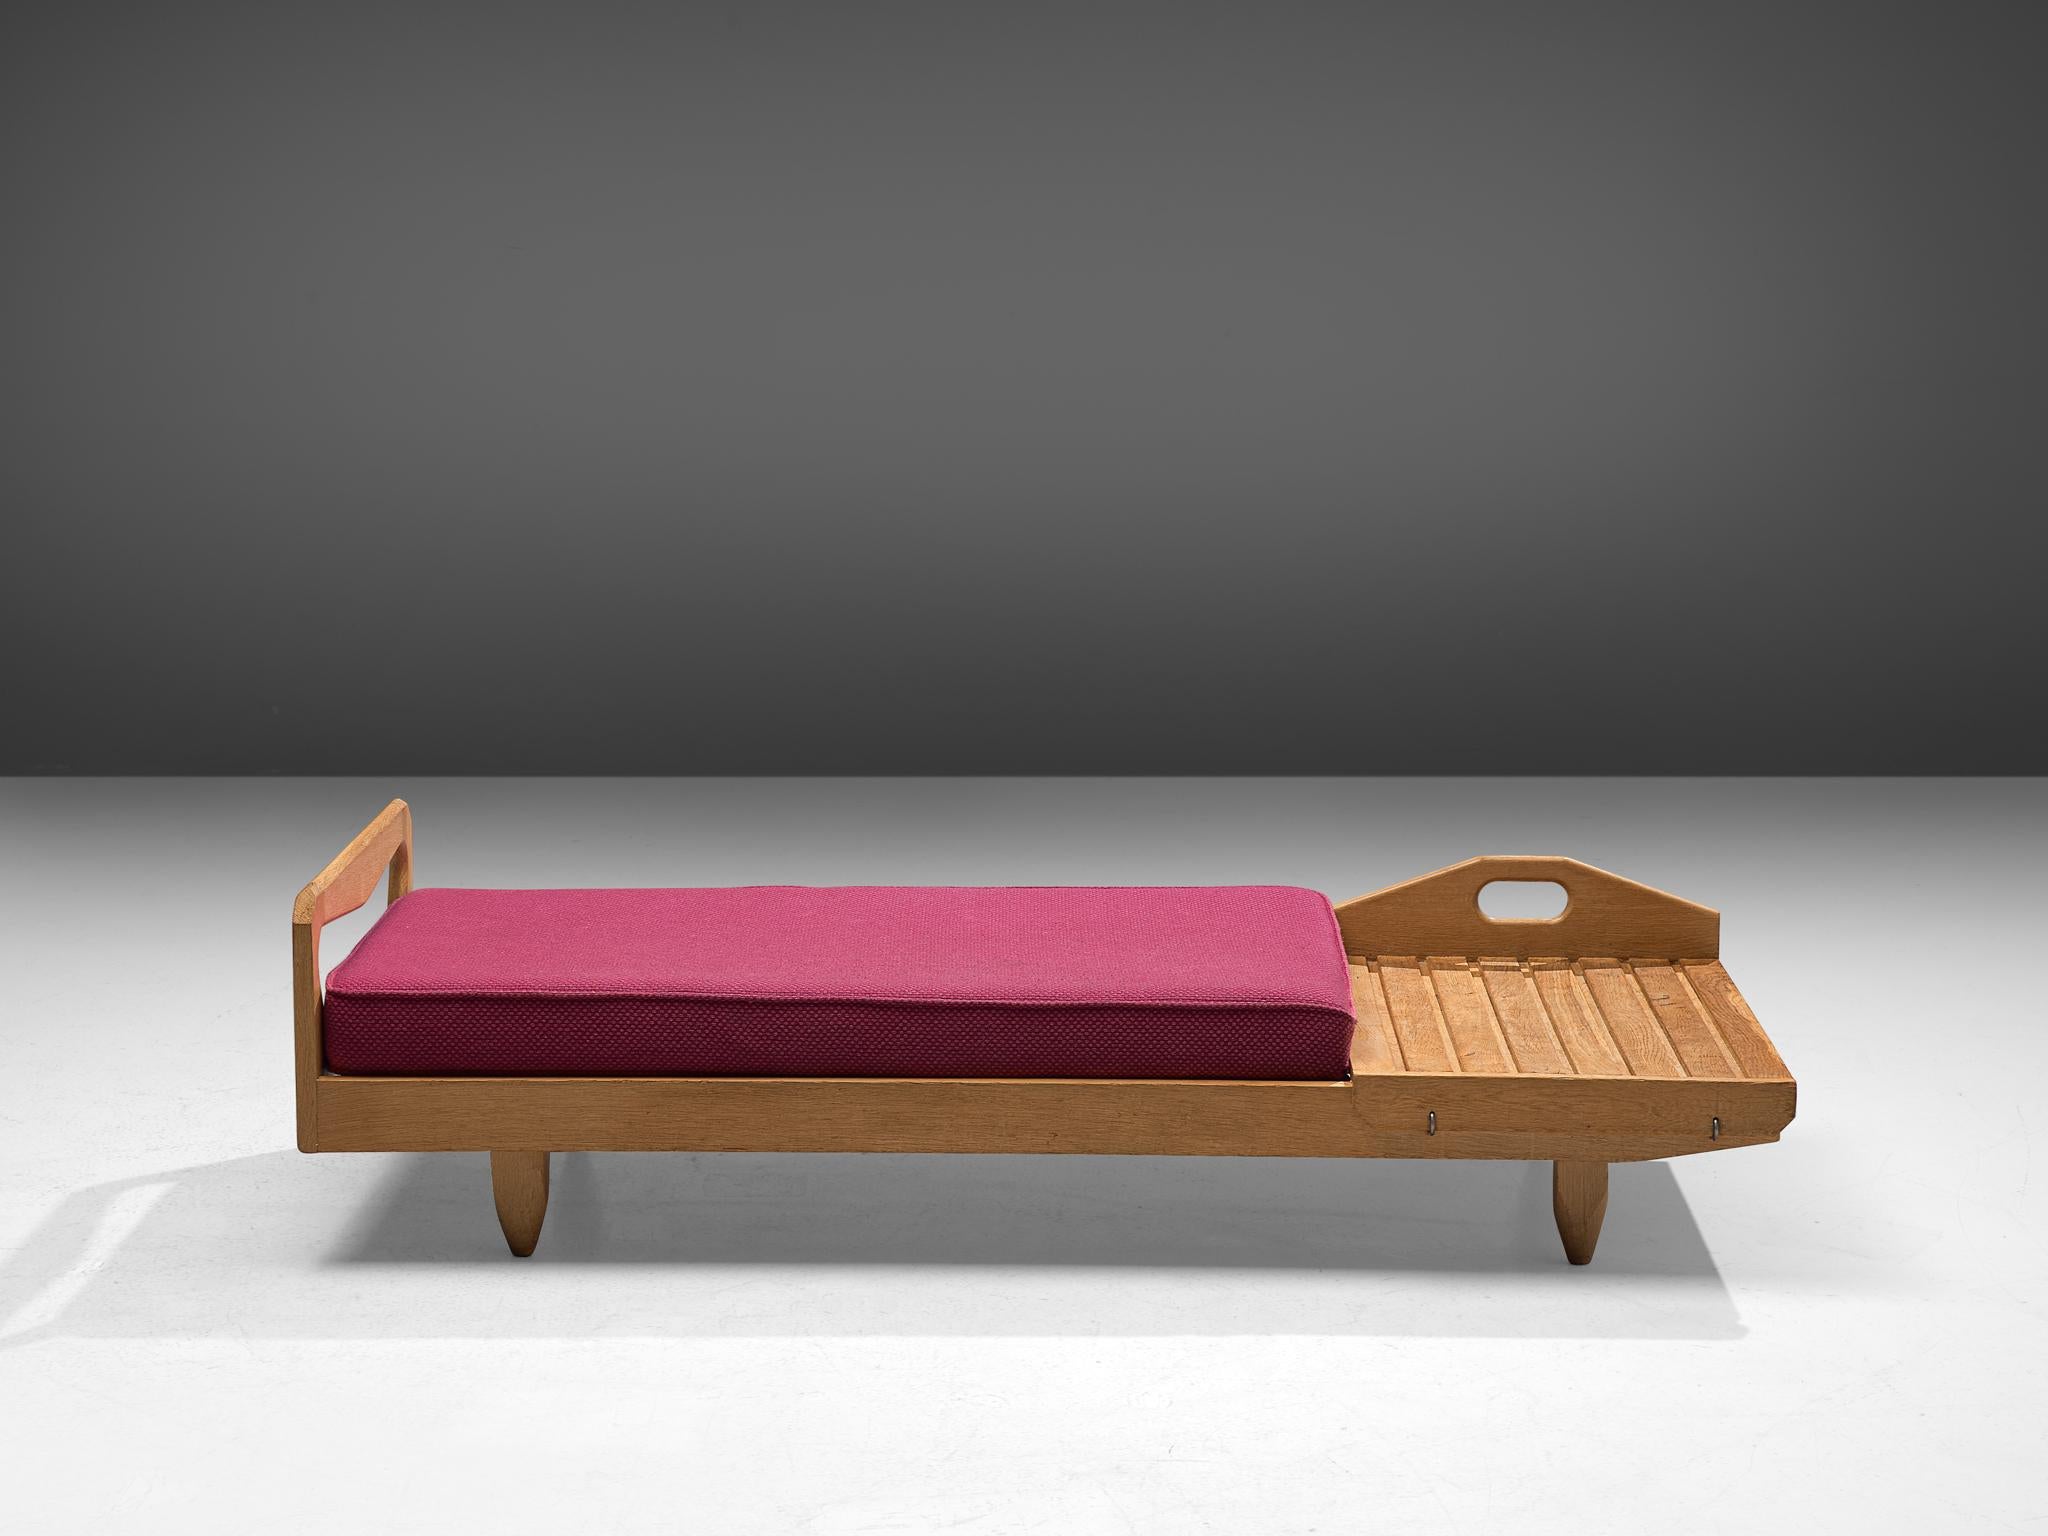 Guillerme et Chambron, daybed, oak and fabric, France, 1960s.

Sturdy sofa bed by Guillerme and Chambron, in solid oak with the typical characteristic decorative details and sculpted forms of the legs. The designs of the designer are known for